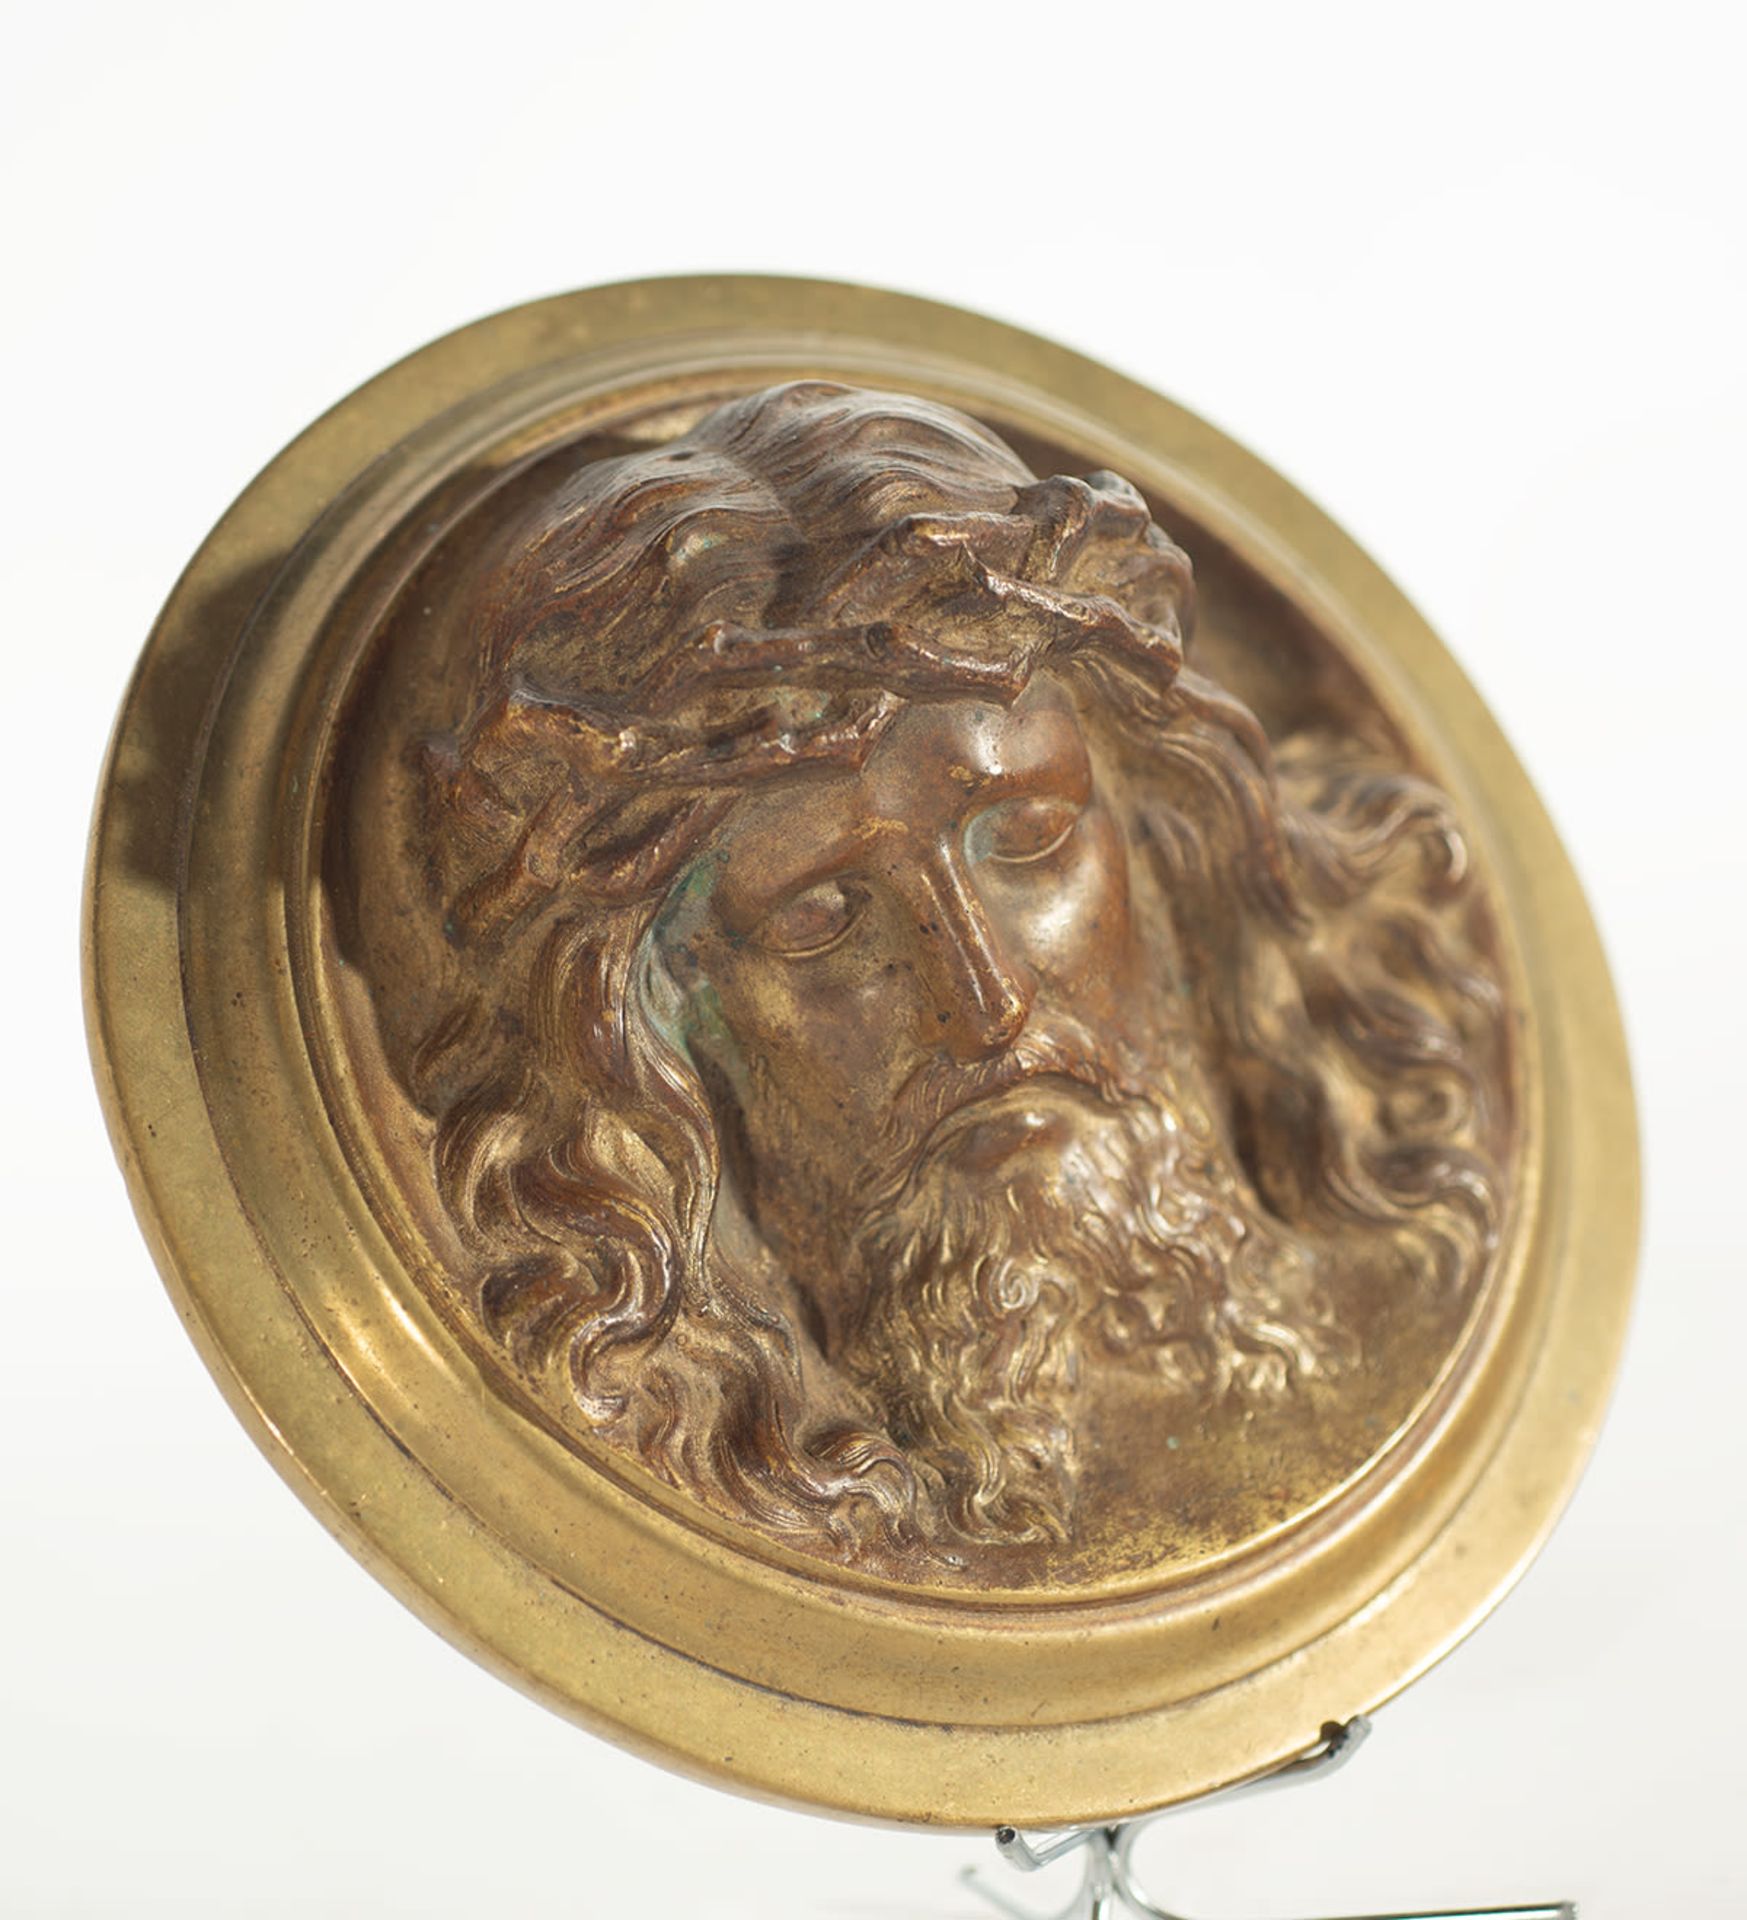 Medallion with the head of Christ in gilt bronze, France or Italy, 18th century - Image 2 of 4